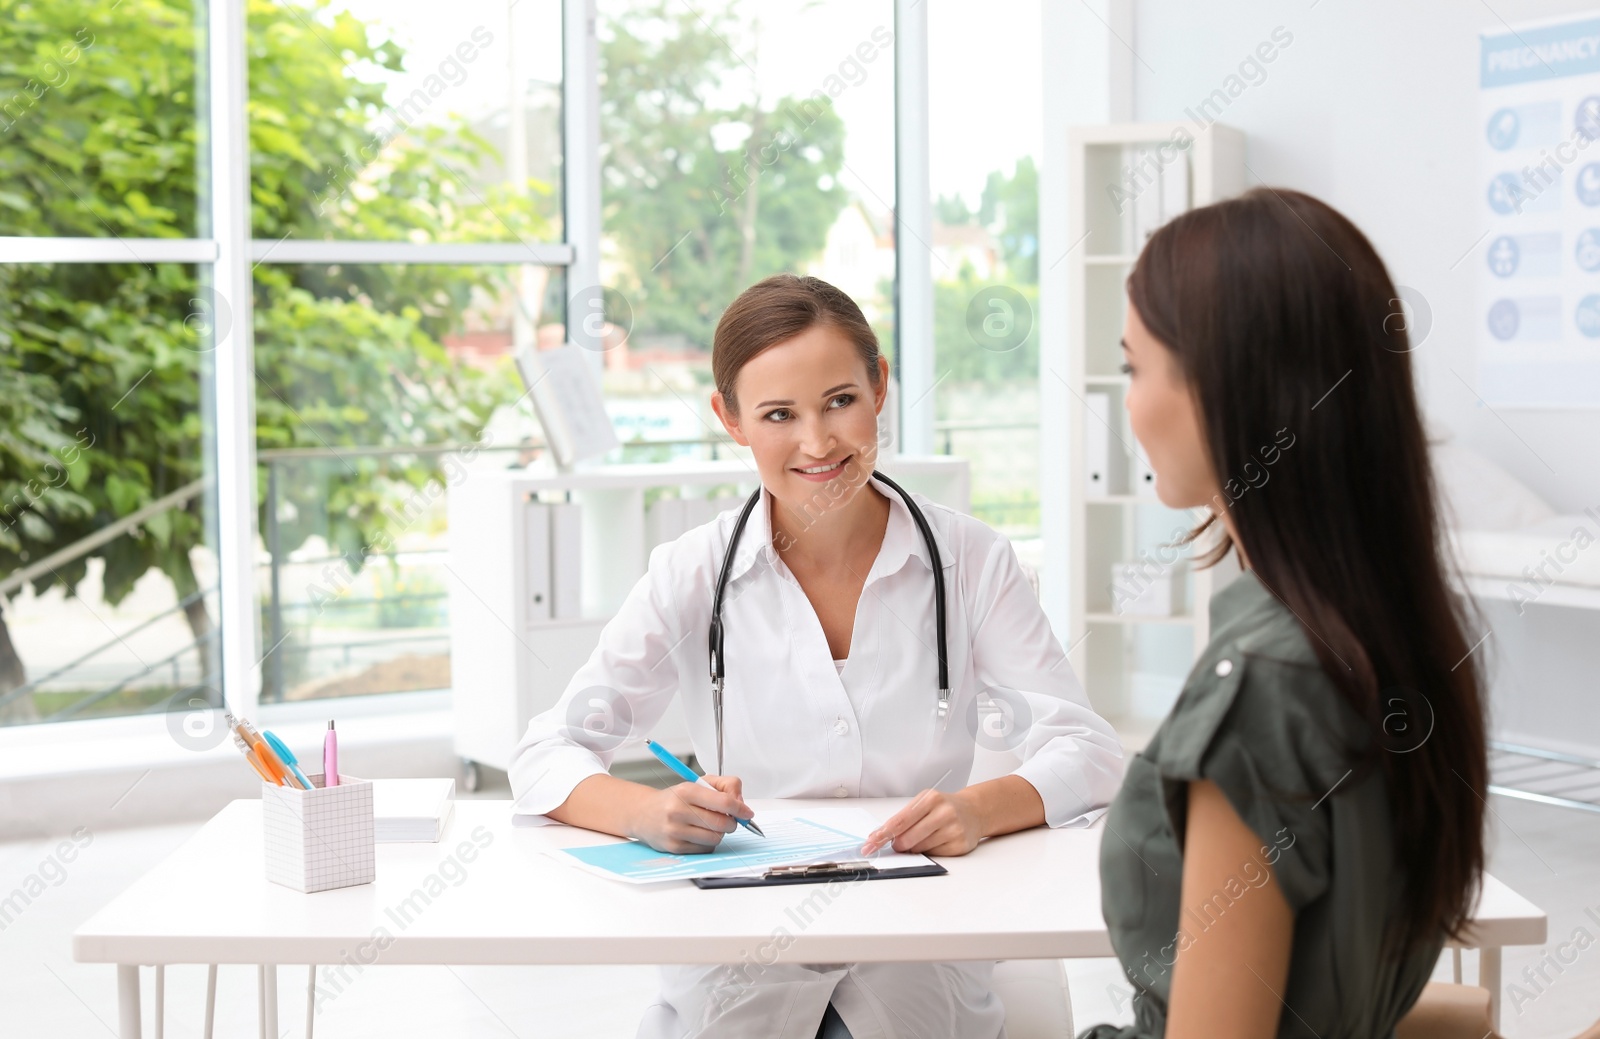 Photo of Patient having appointment with doctor in hospital